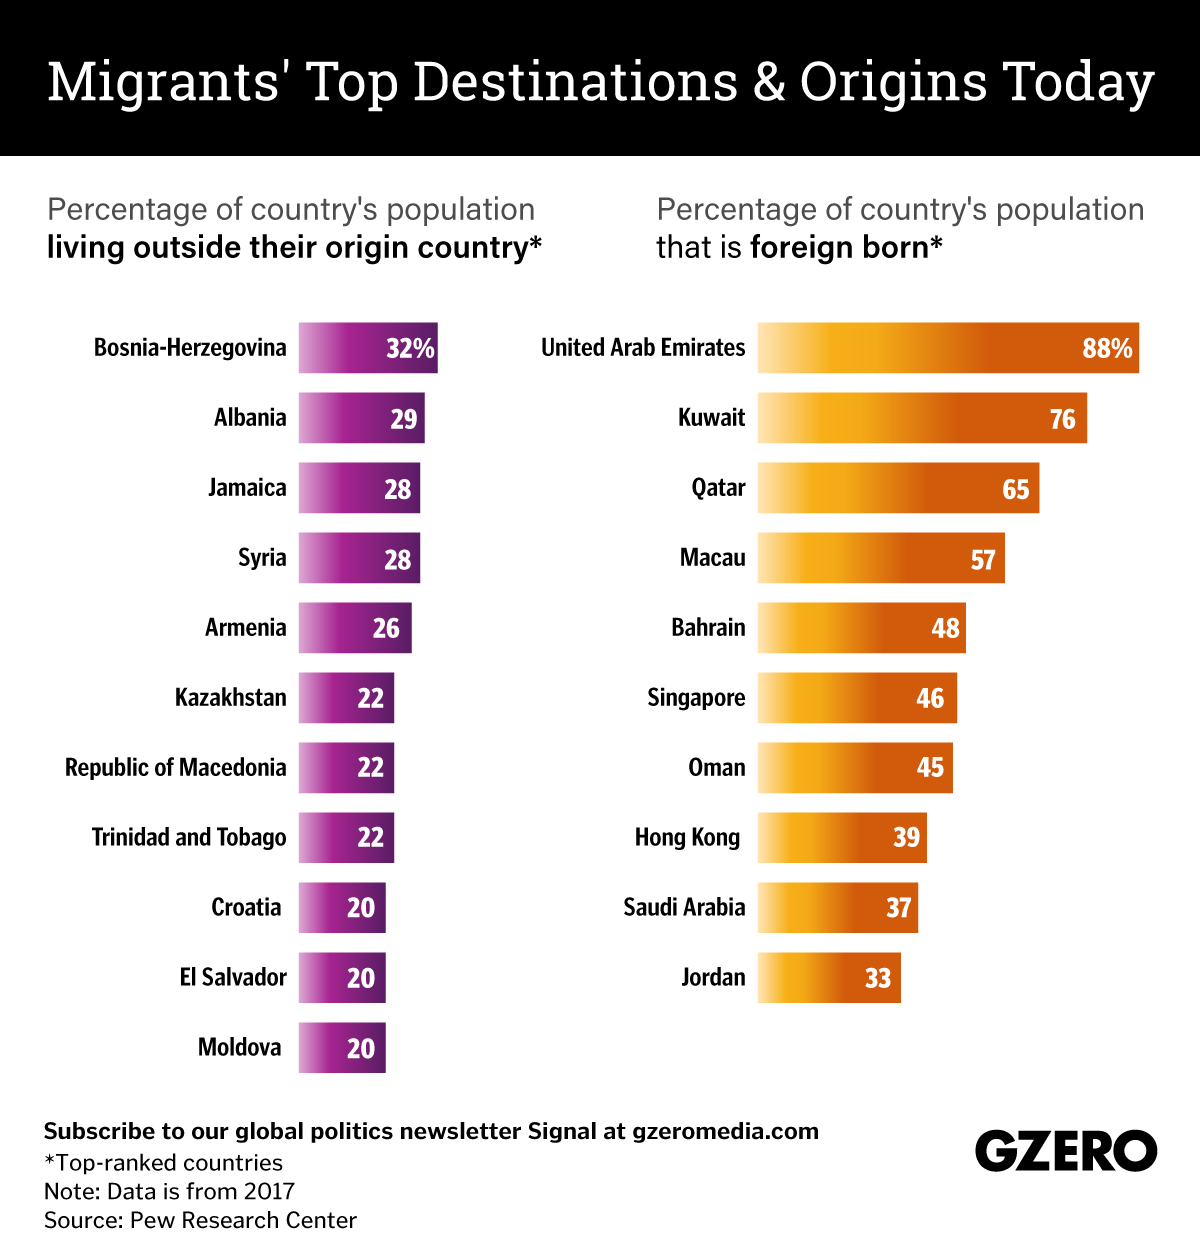 The Graphic Truth: Migrants' top destinations and origins today